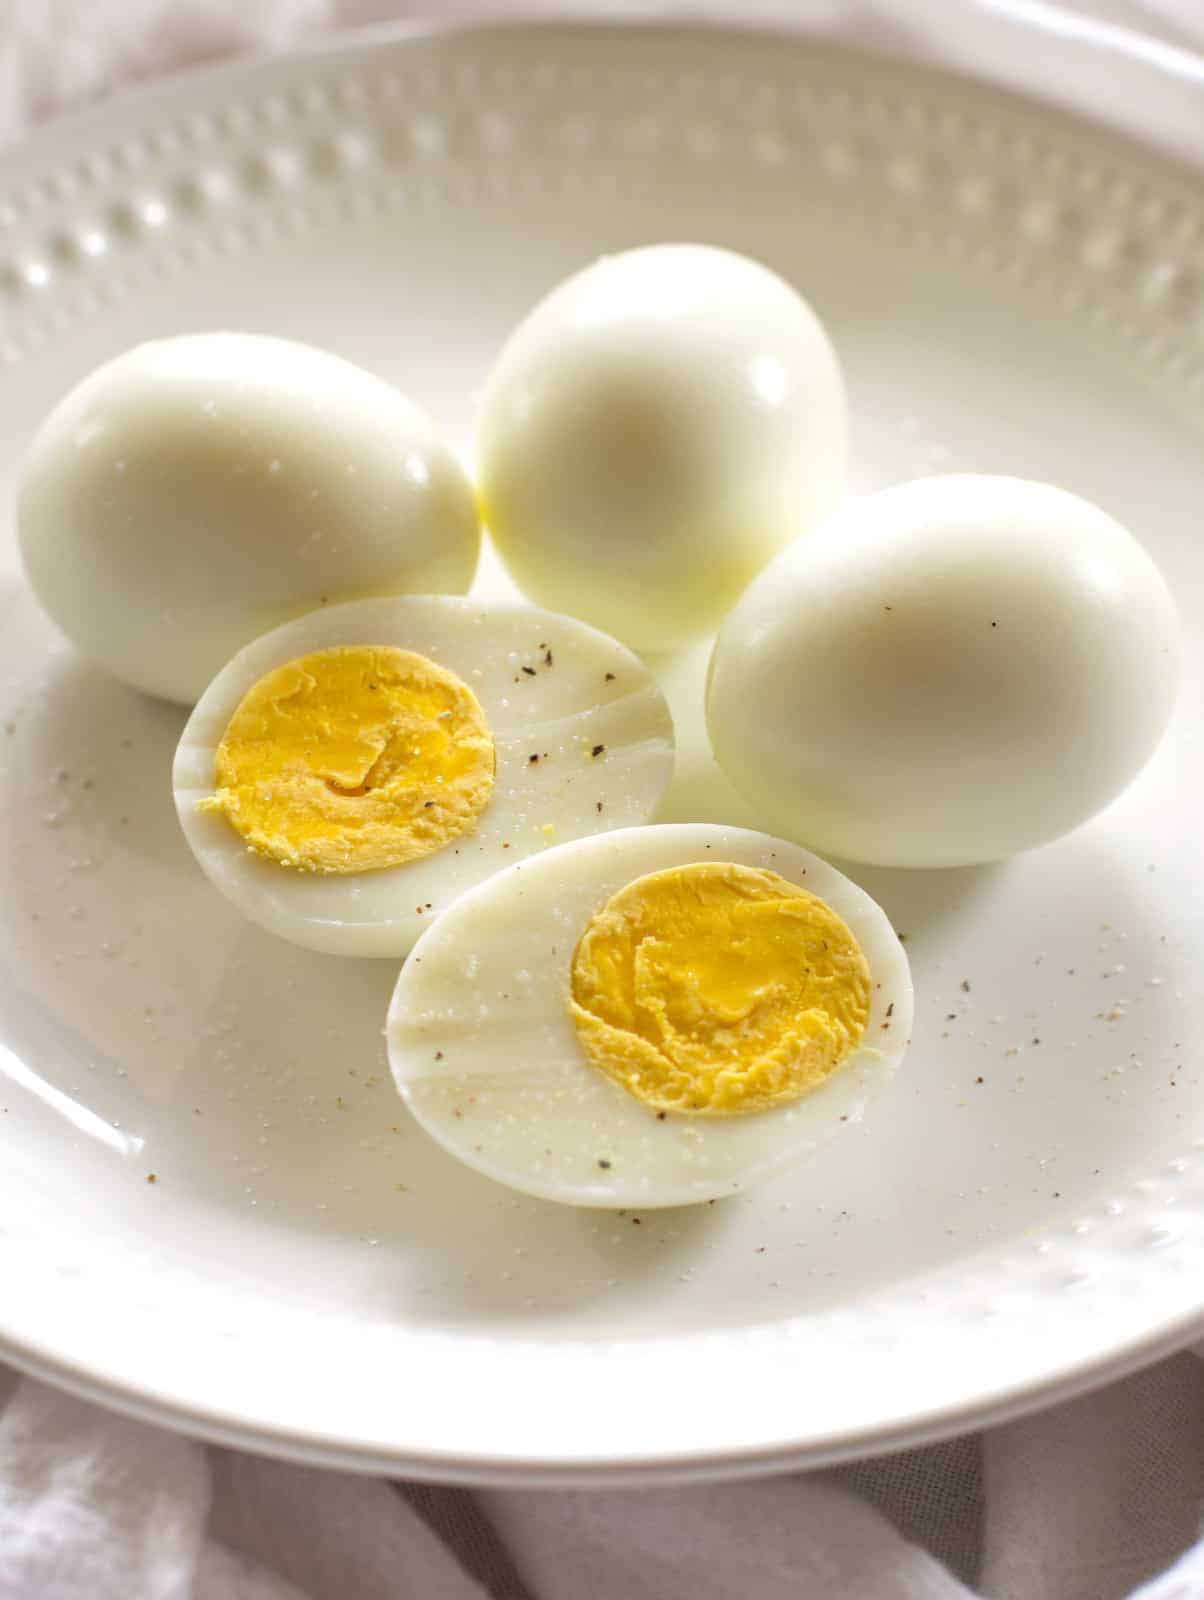 https://www.the-girl-who-ate-everything.com/wp-content/uploads/2011/04/how-to-hard-boil-eggs-15.jpg